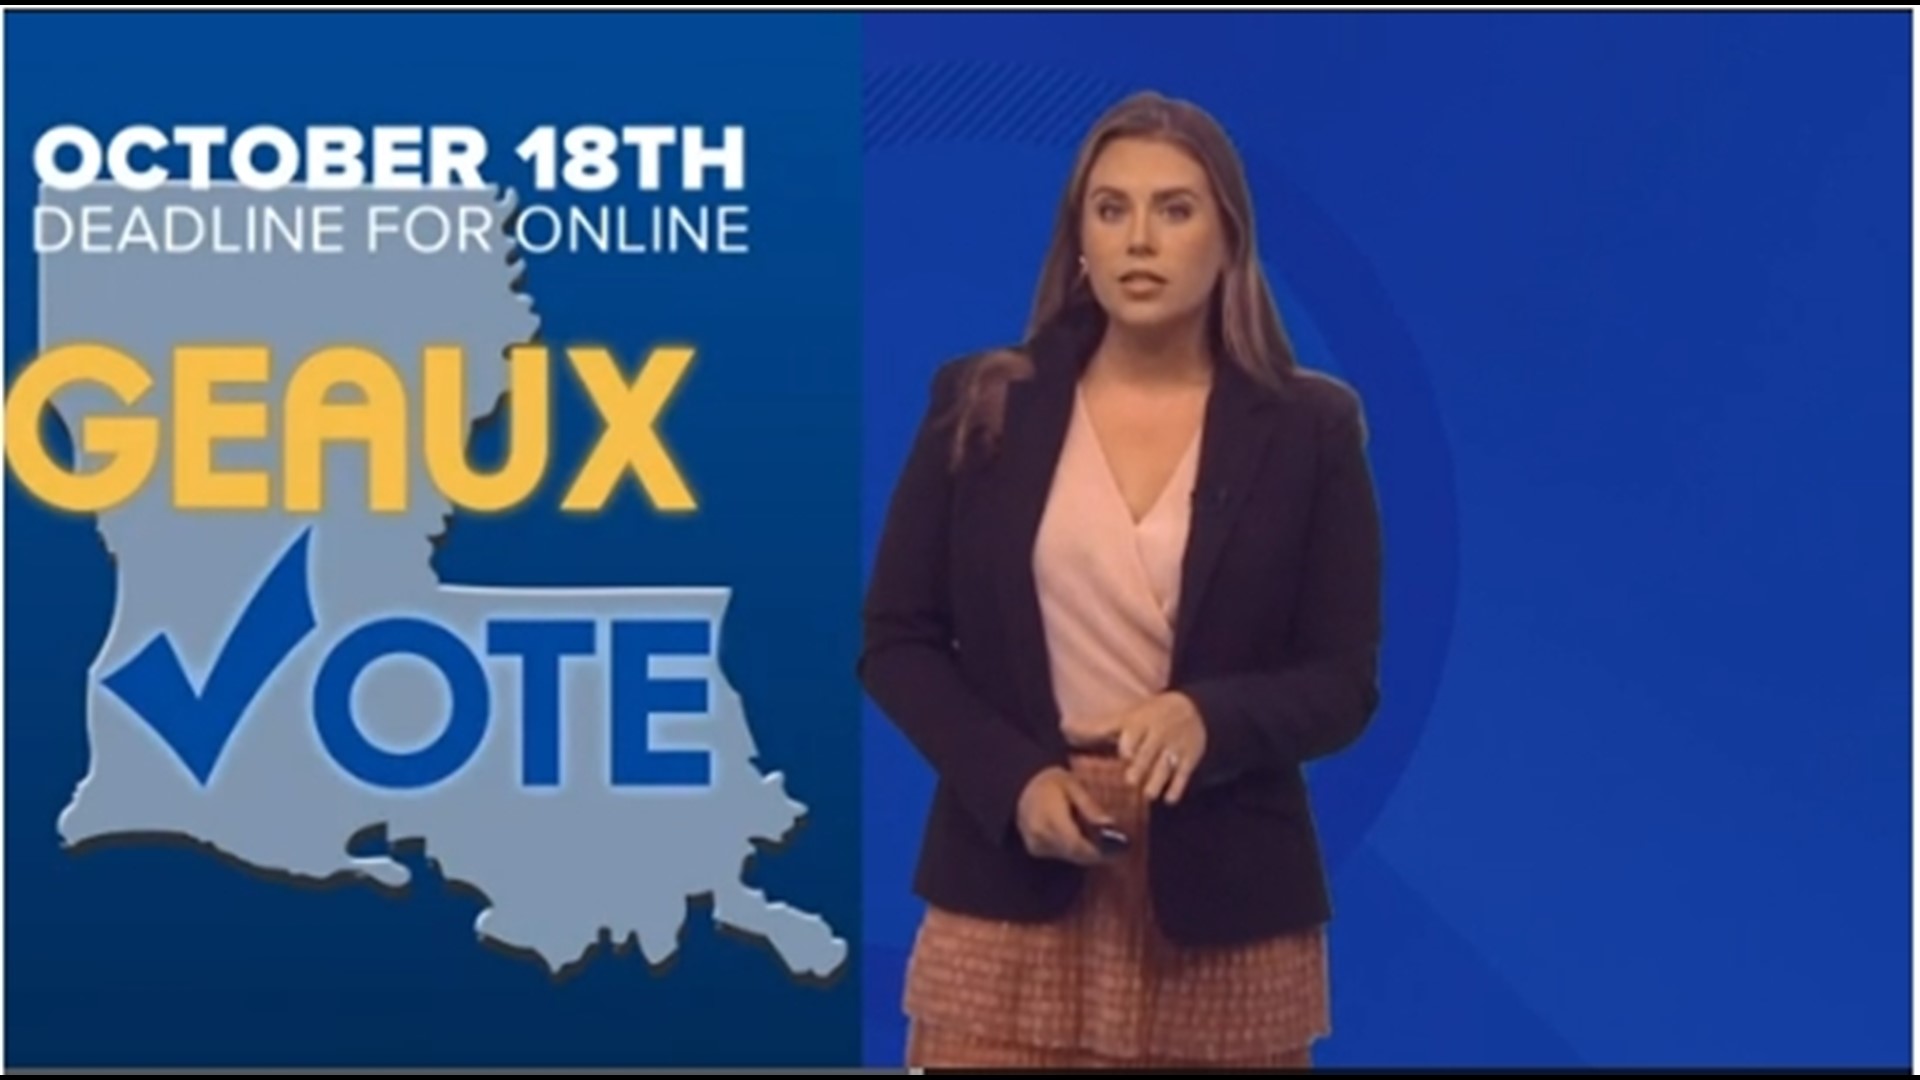 You can also register to vote online until October 18th using the state’s GeauxVote Registration system.